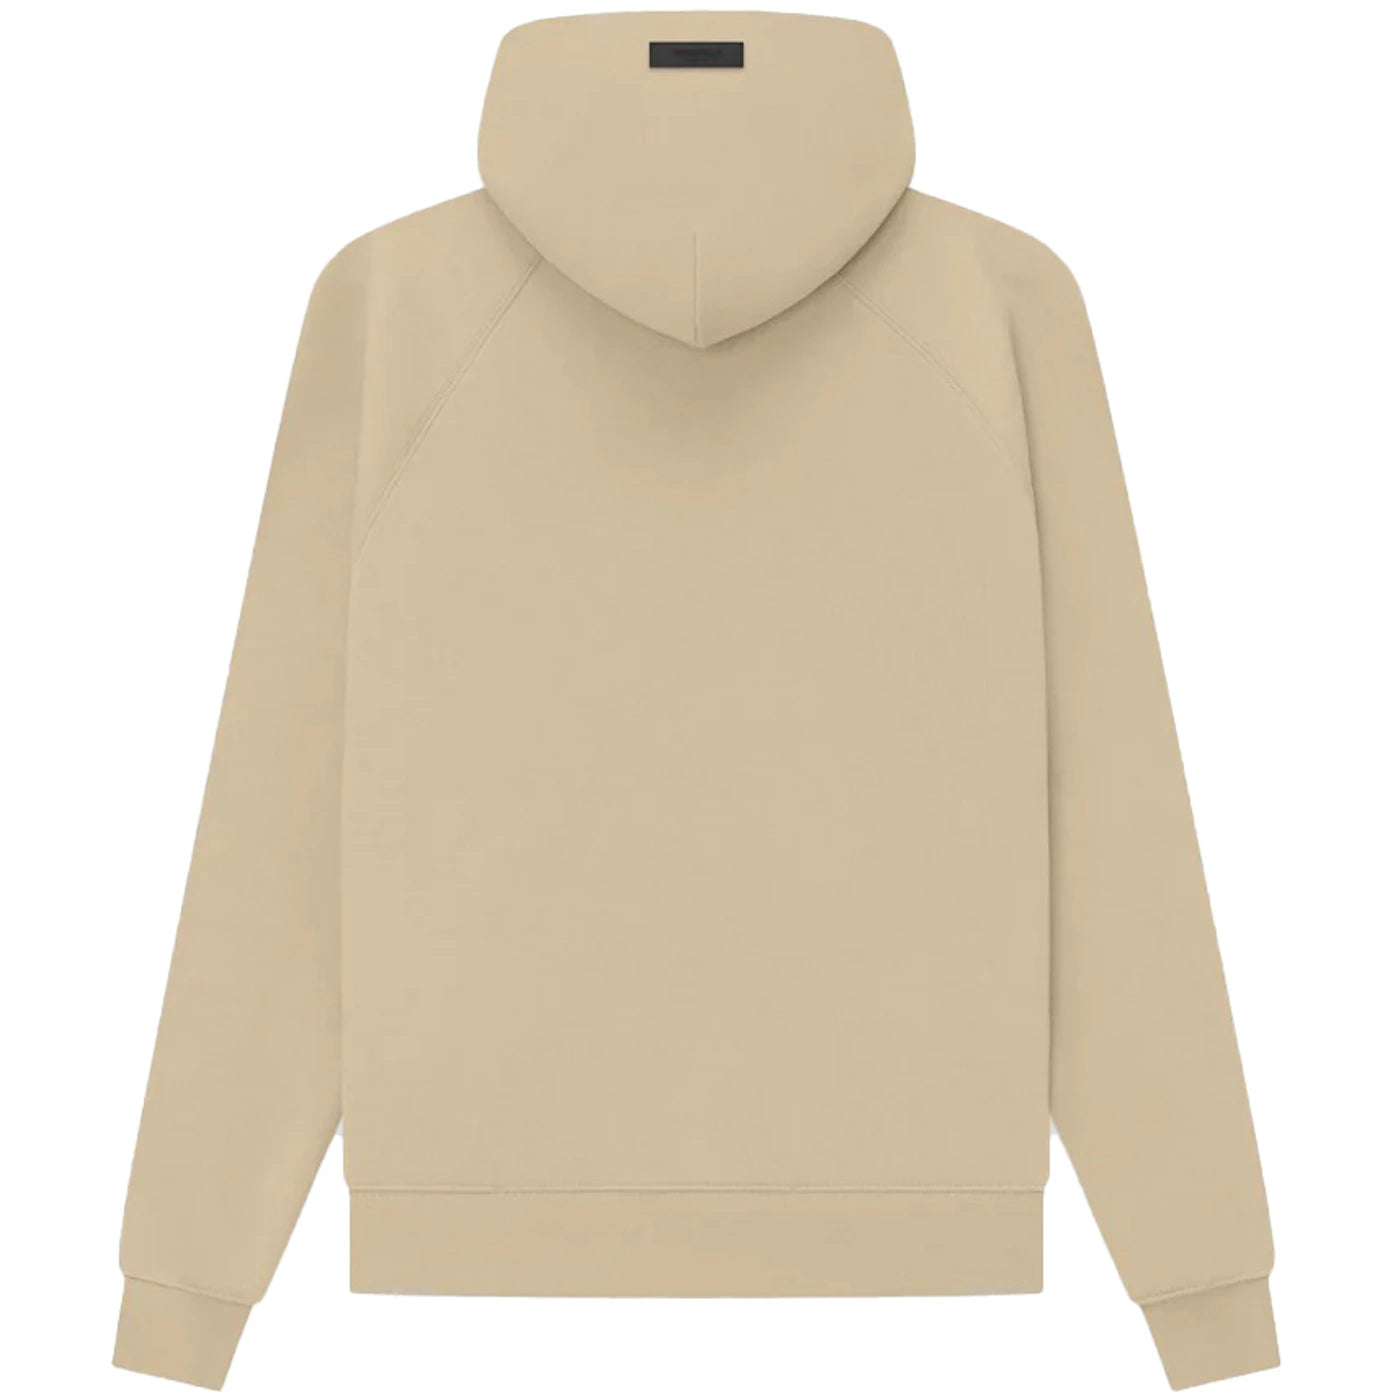 FEAR OF GOD ESSENTIALS HOODIE SAND